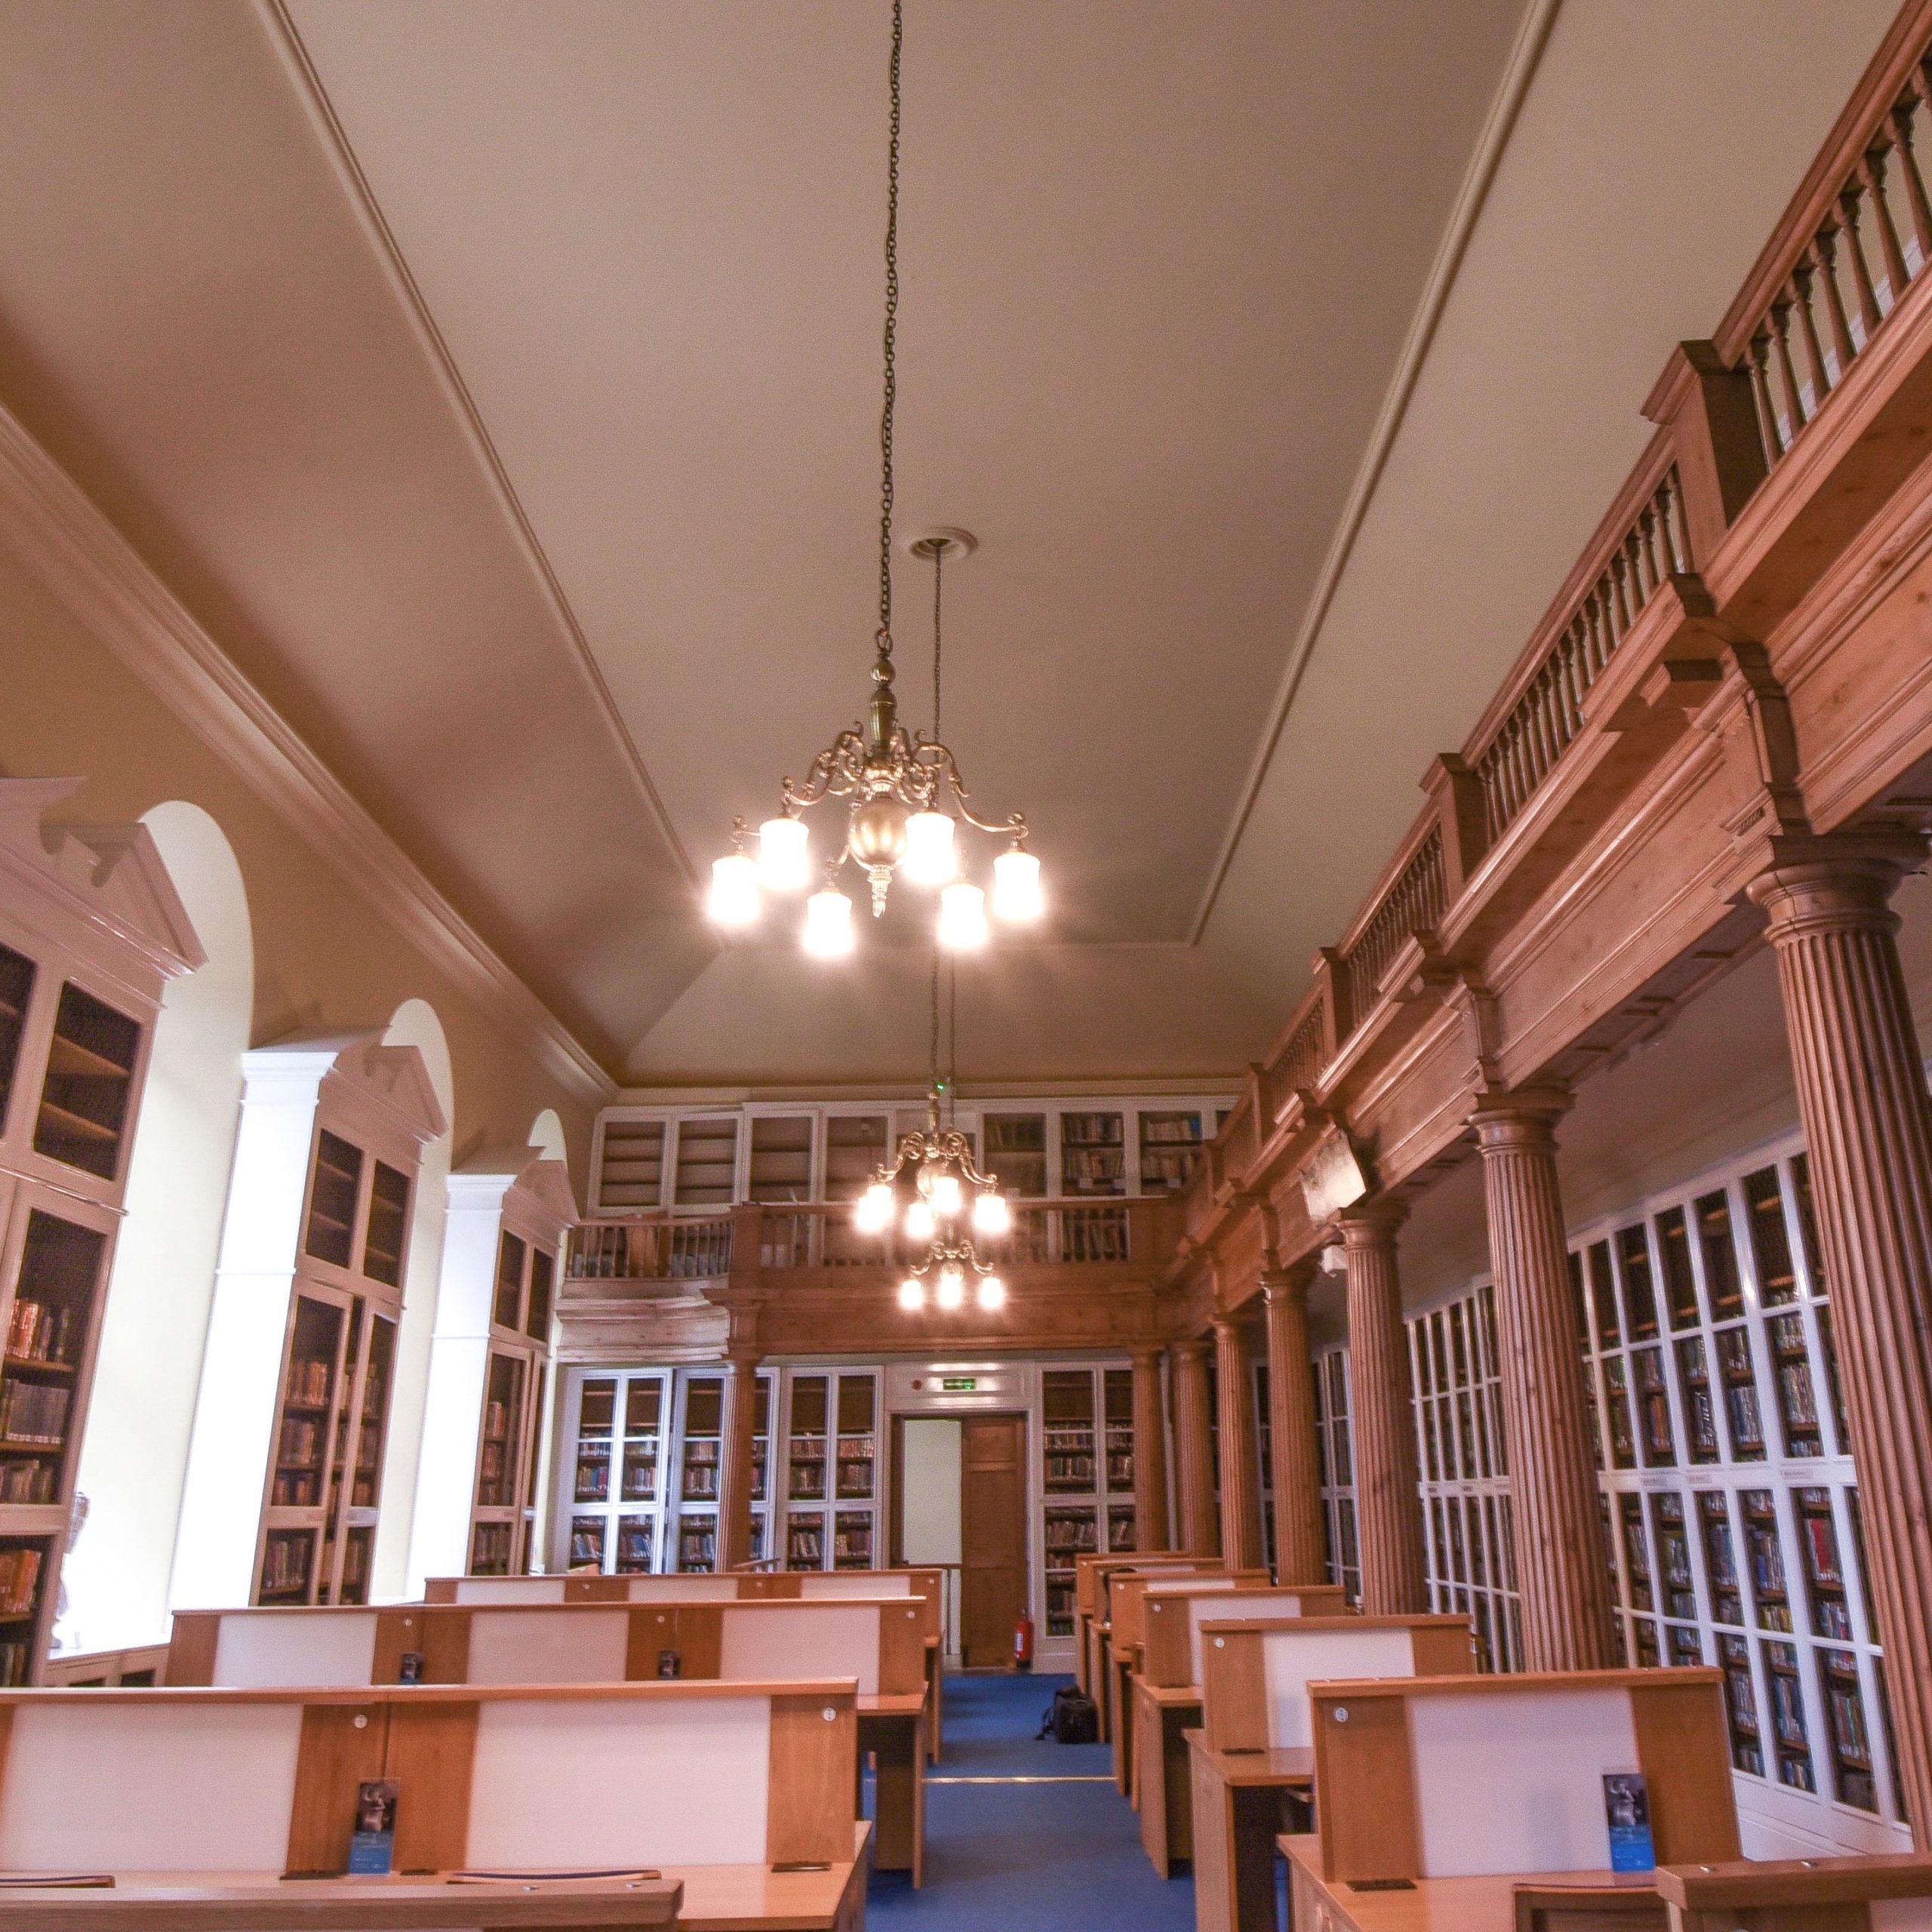 A library with desks in the middle and a balcony